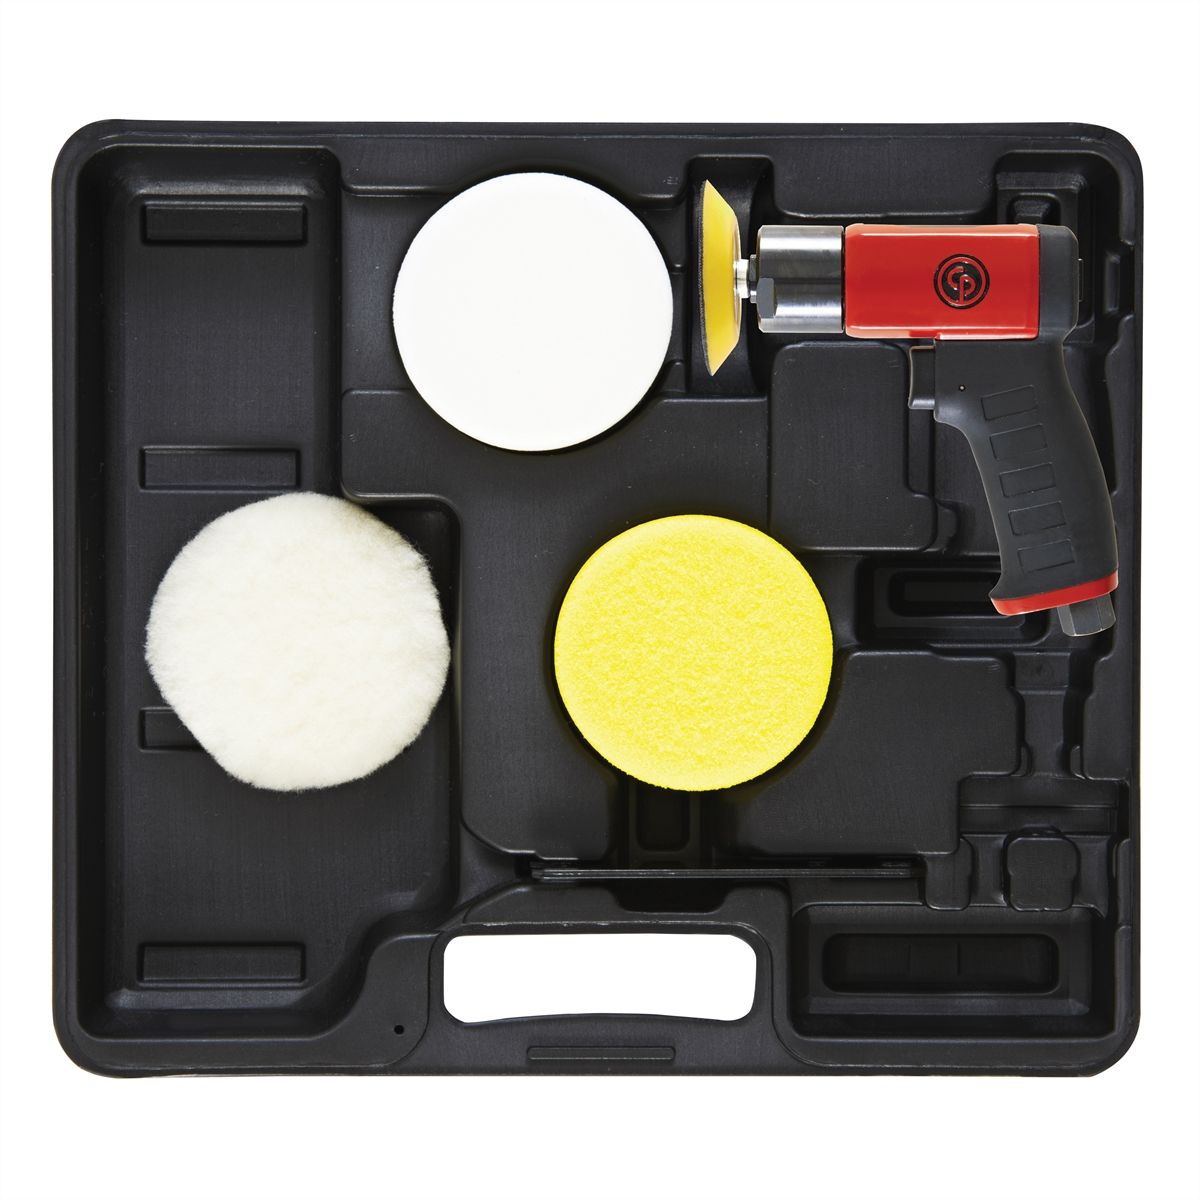 Chicago Pneumatic CP7202D 3" Rotary Sanding Kit